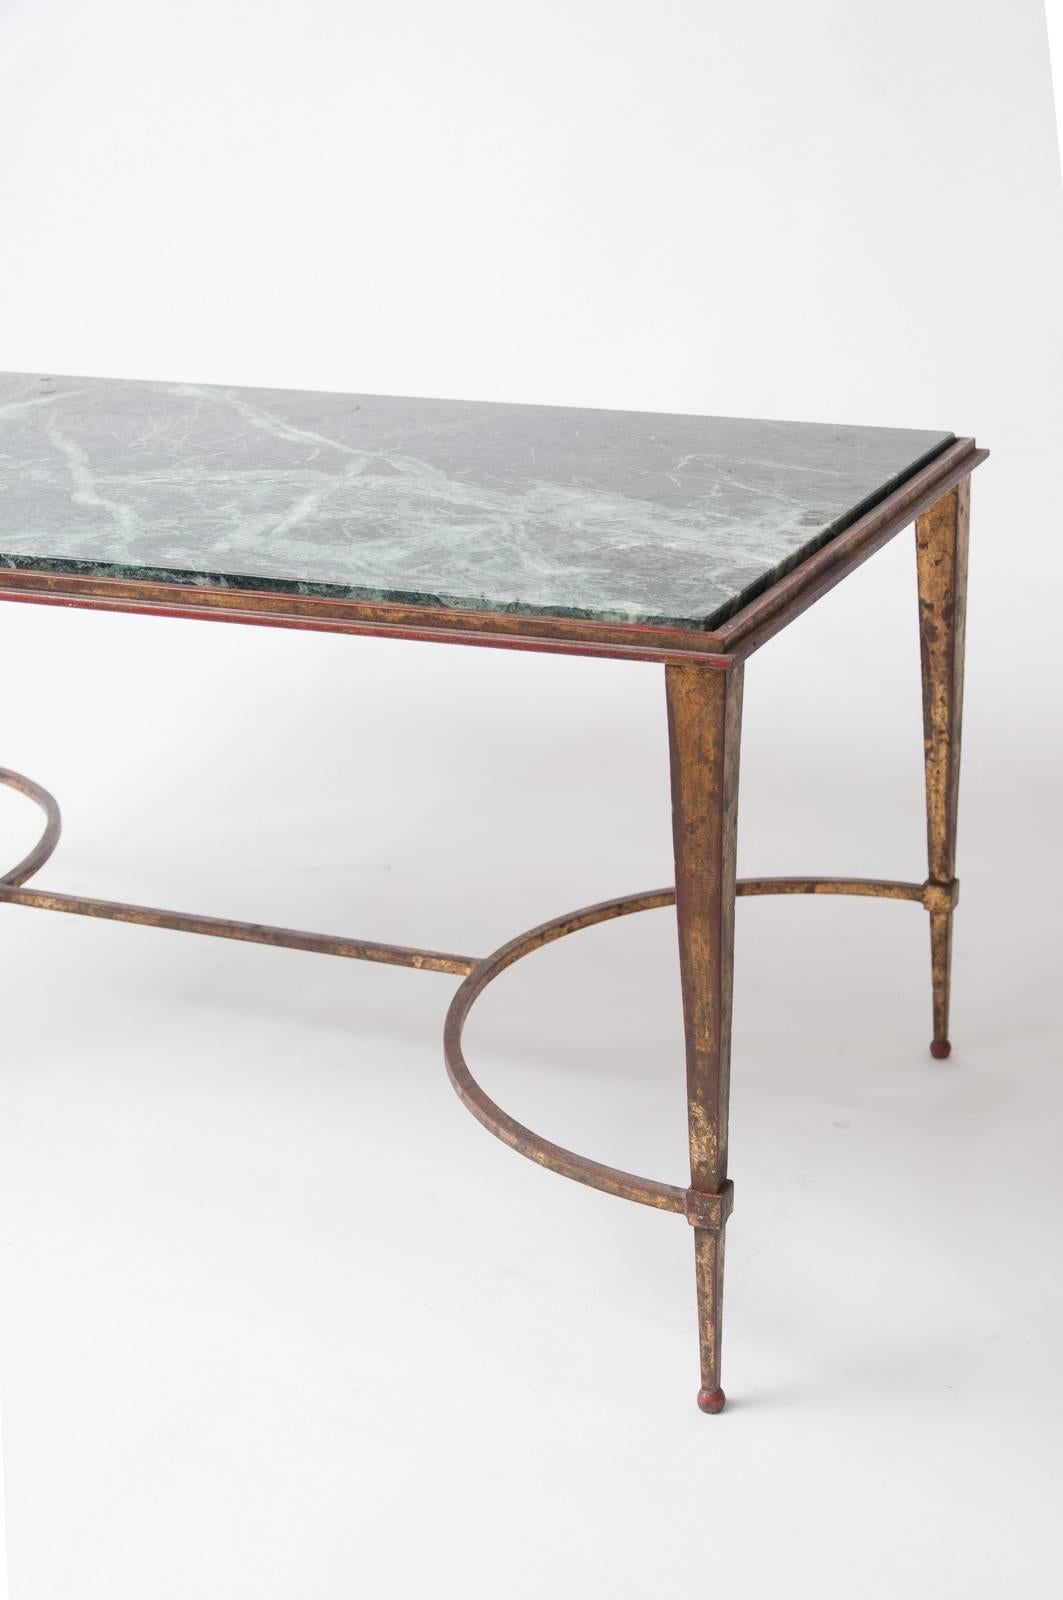 French Attributed to Maison Ramsay Low Table